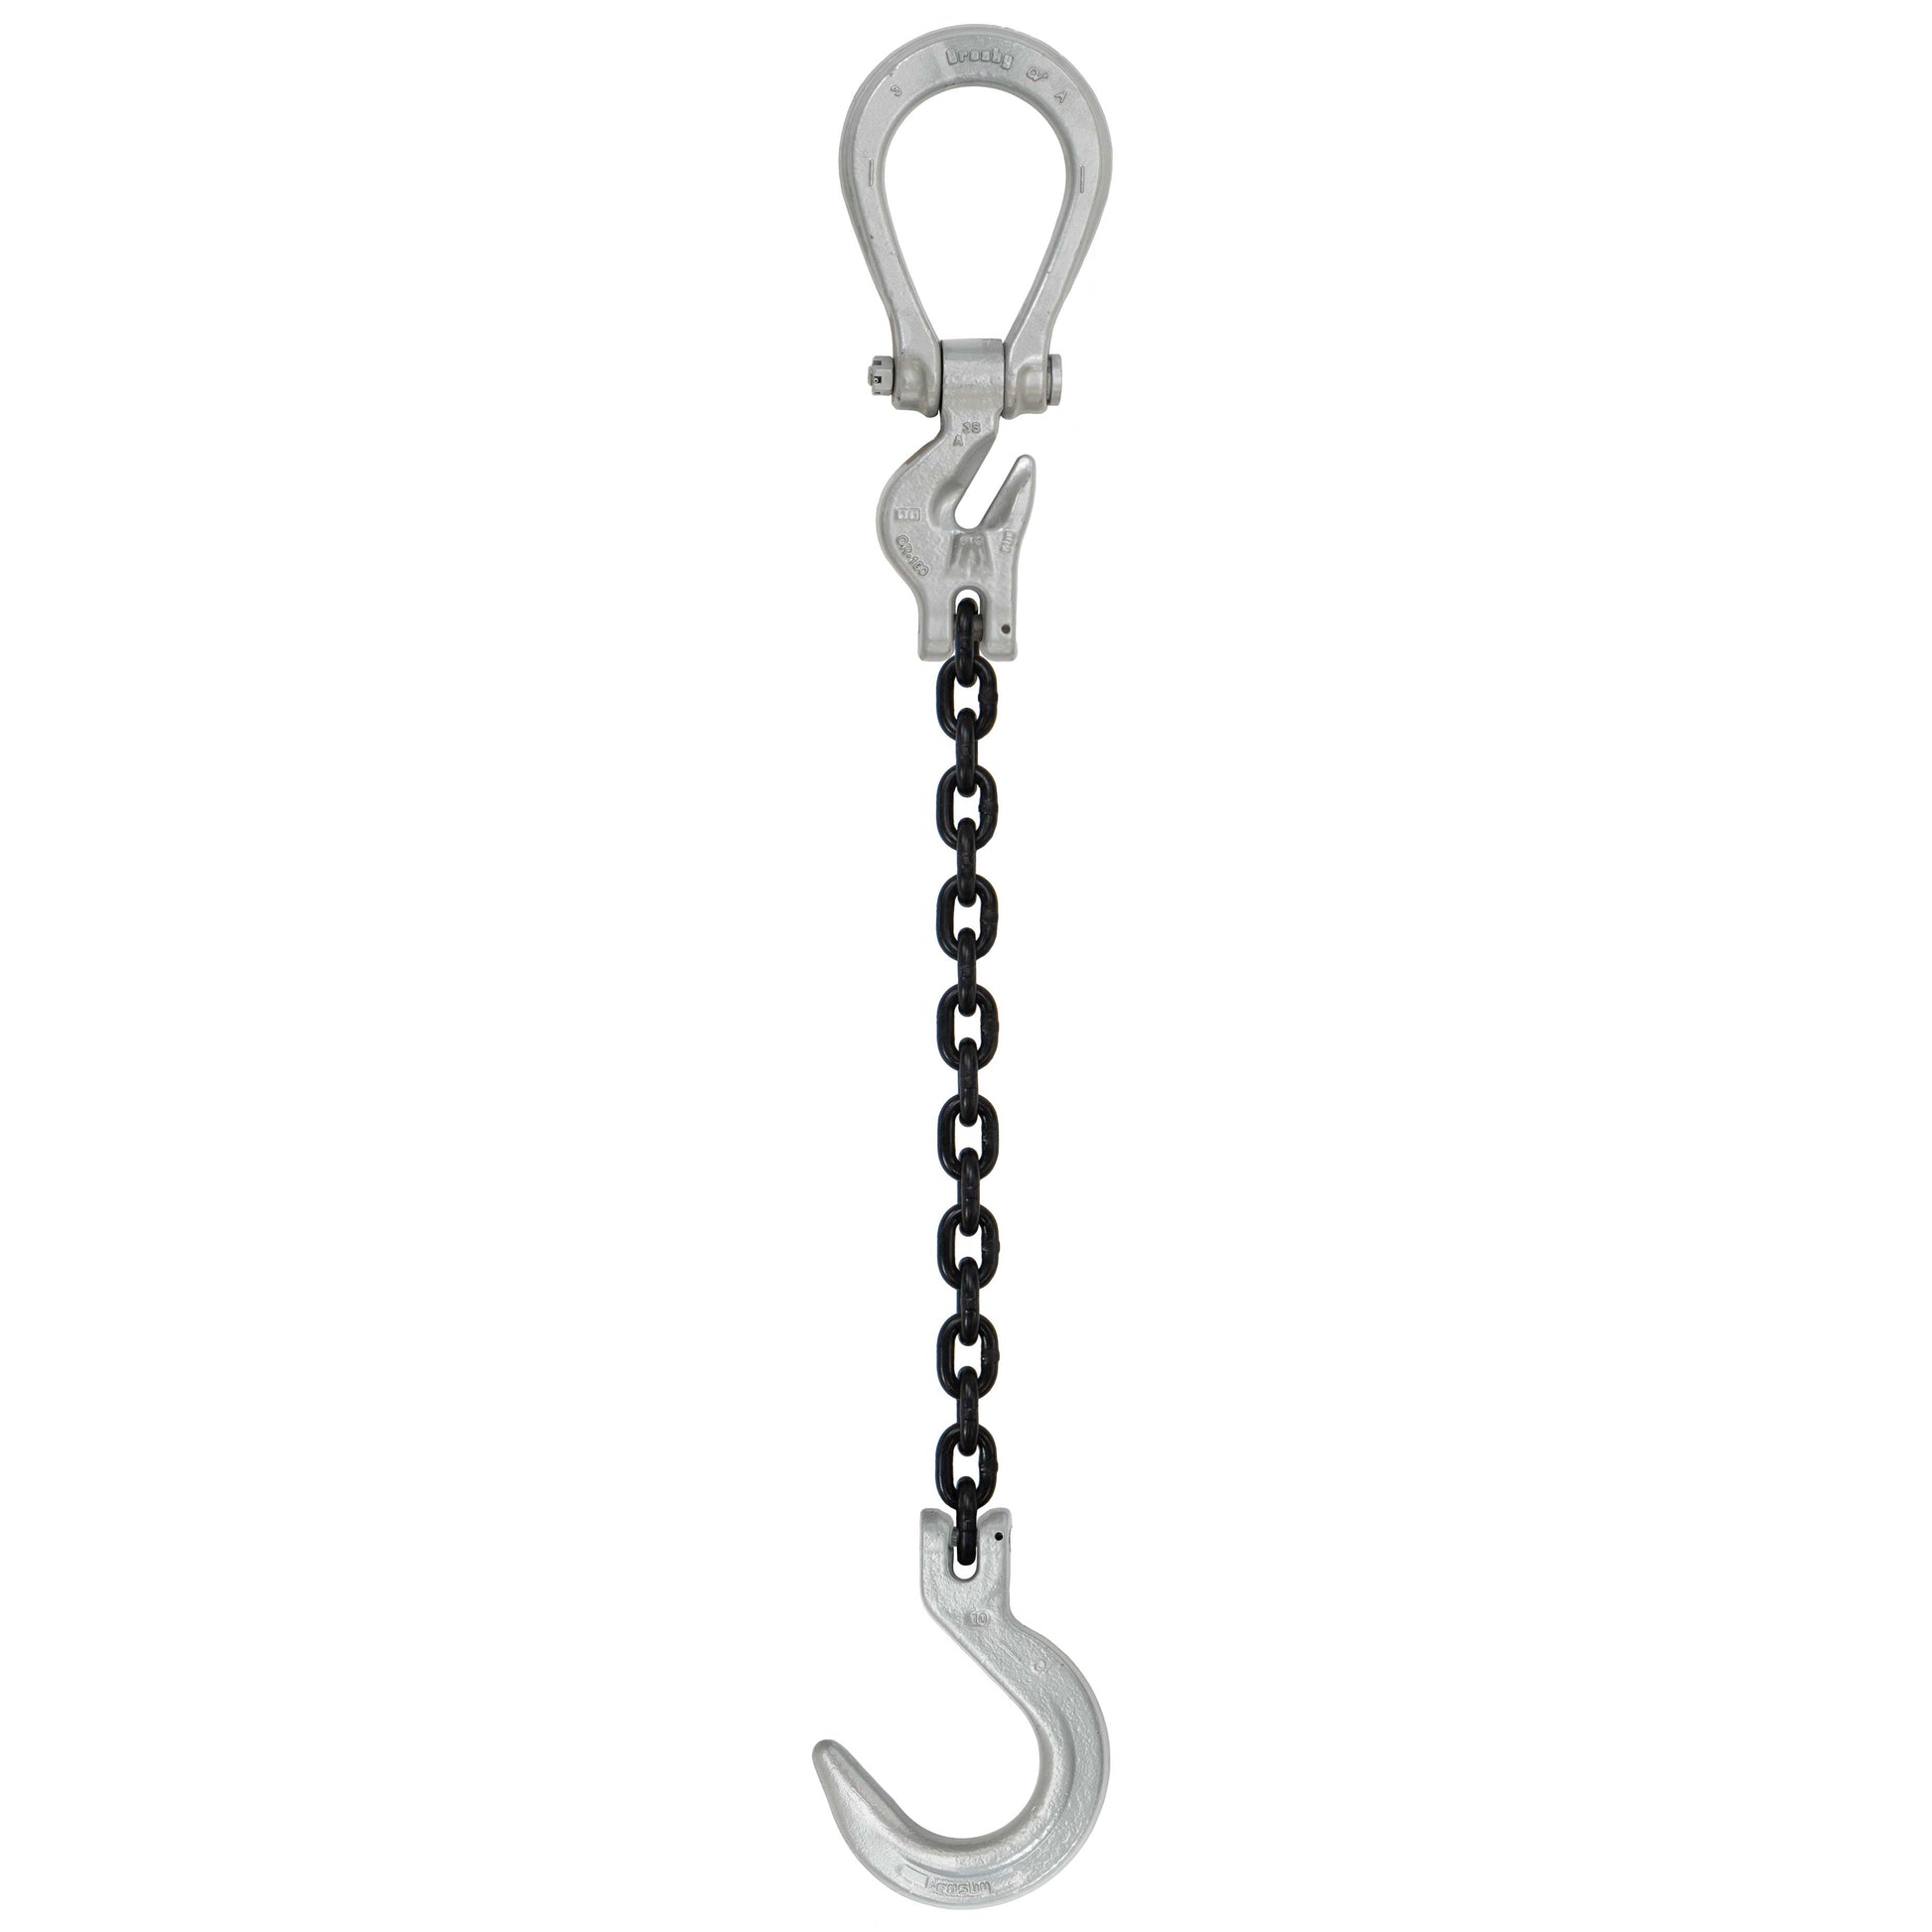 12 inch x 20 foot Domestic Adjustable Single Leg Chain Sling w Crosby Foundry Hook Grade 100 image 1 of 2